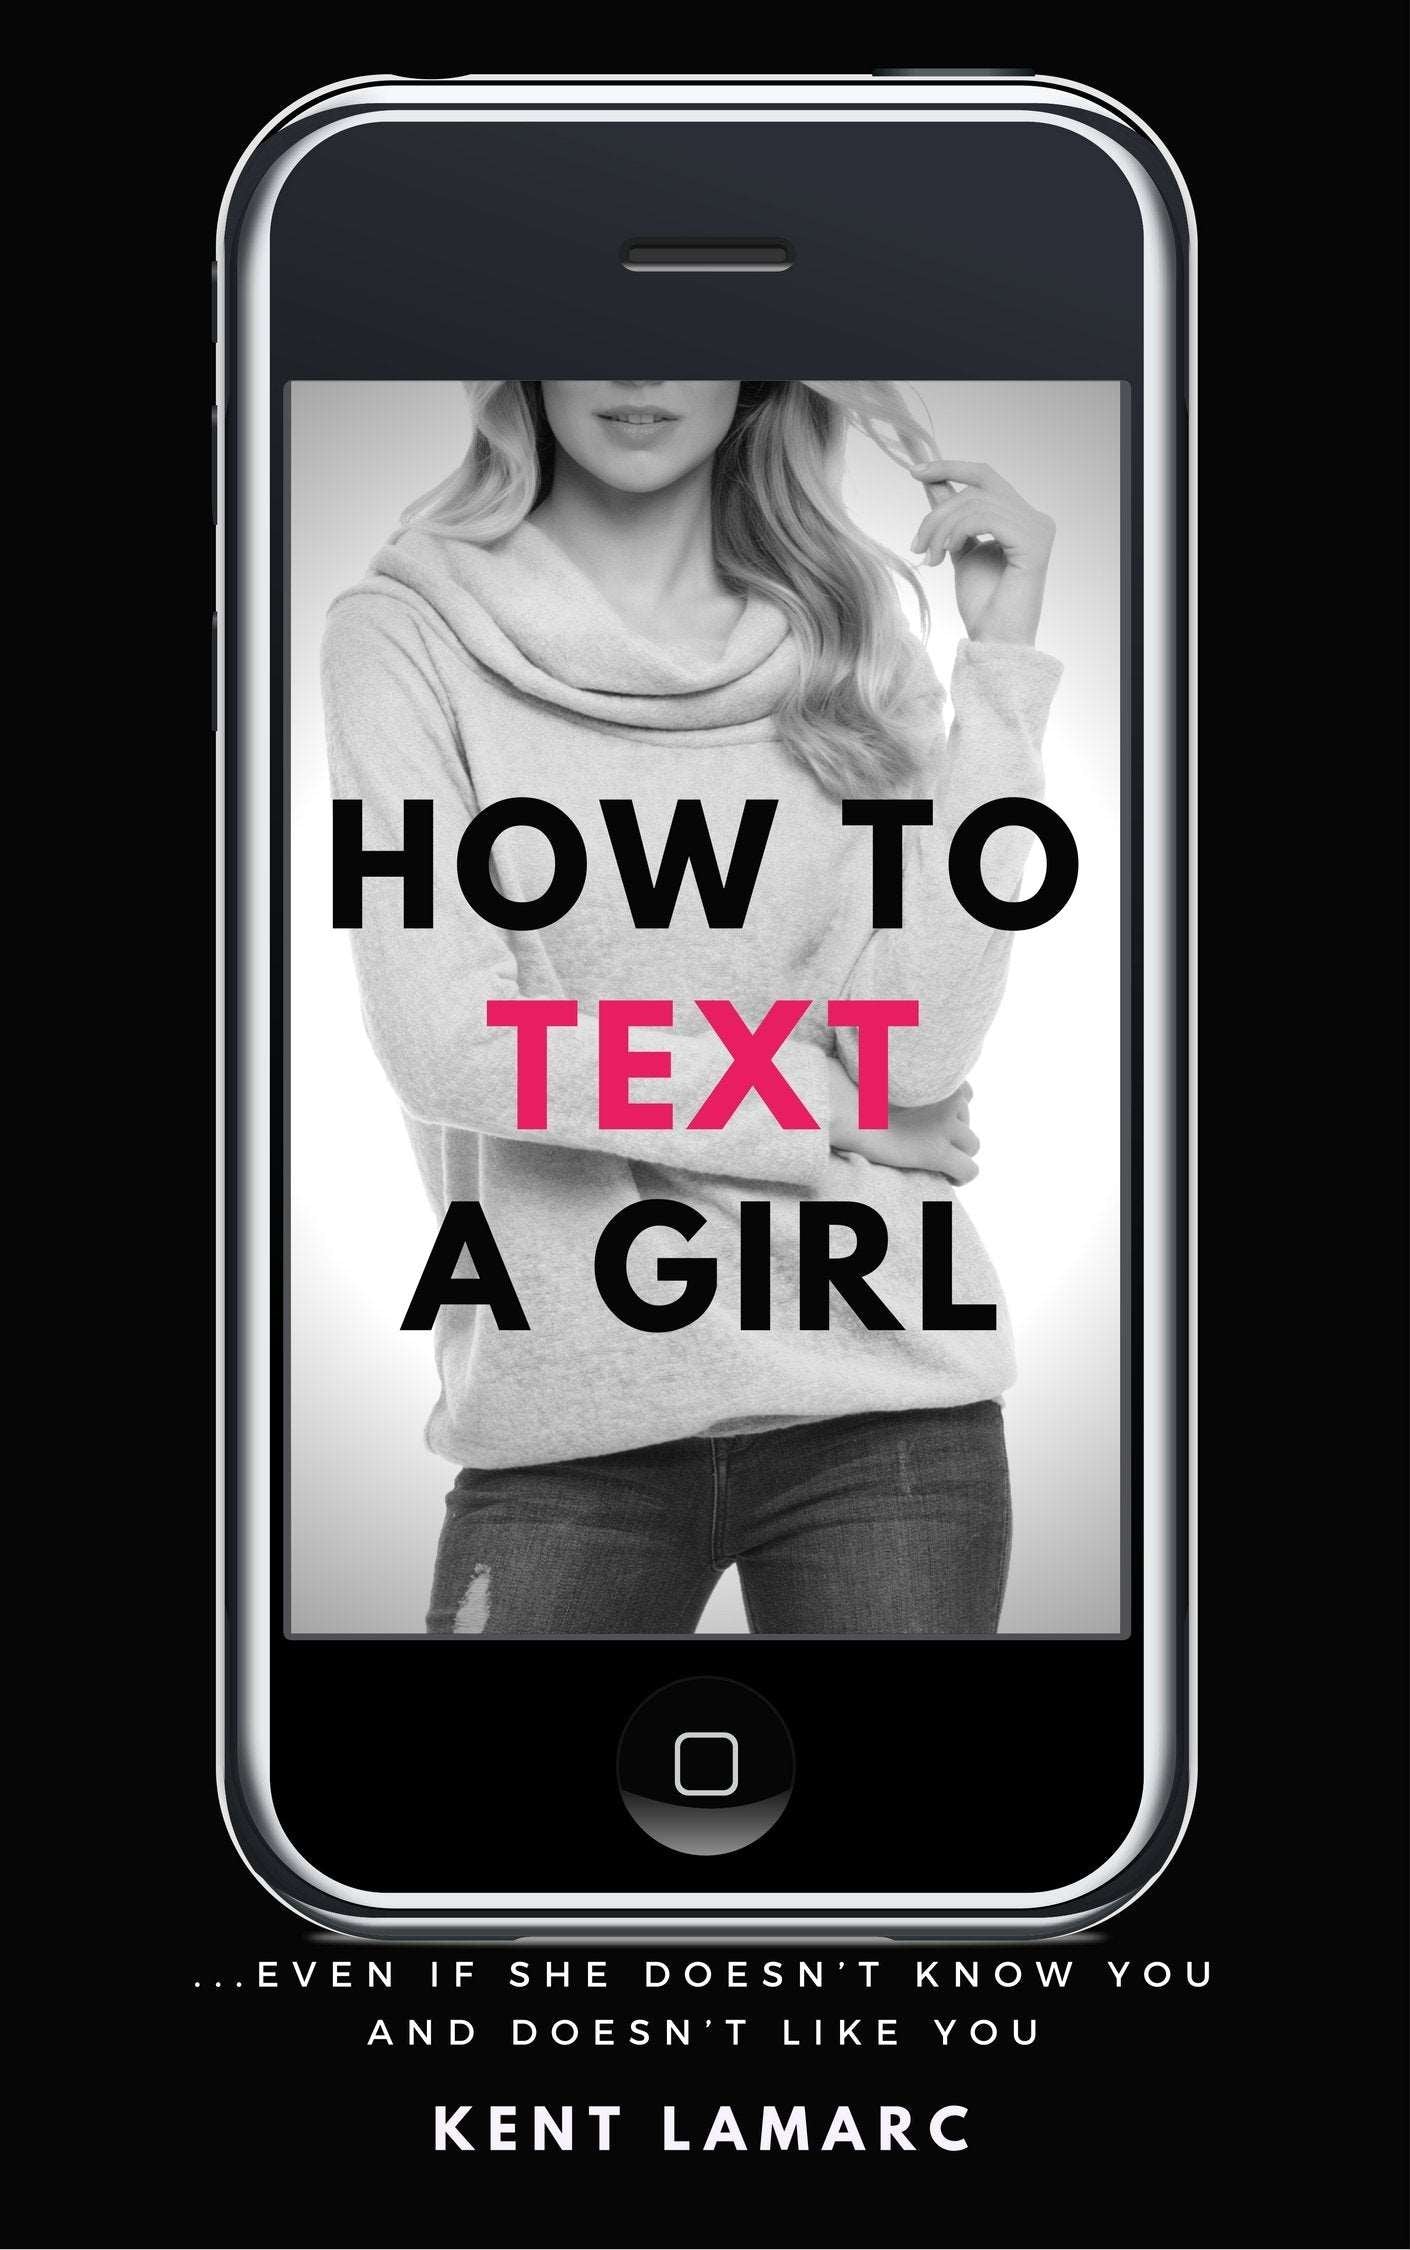 How to Text a Girl